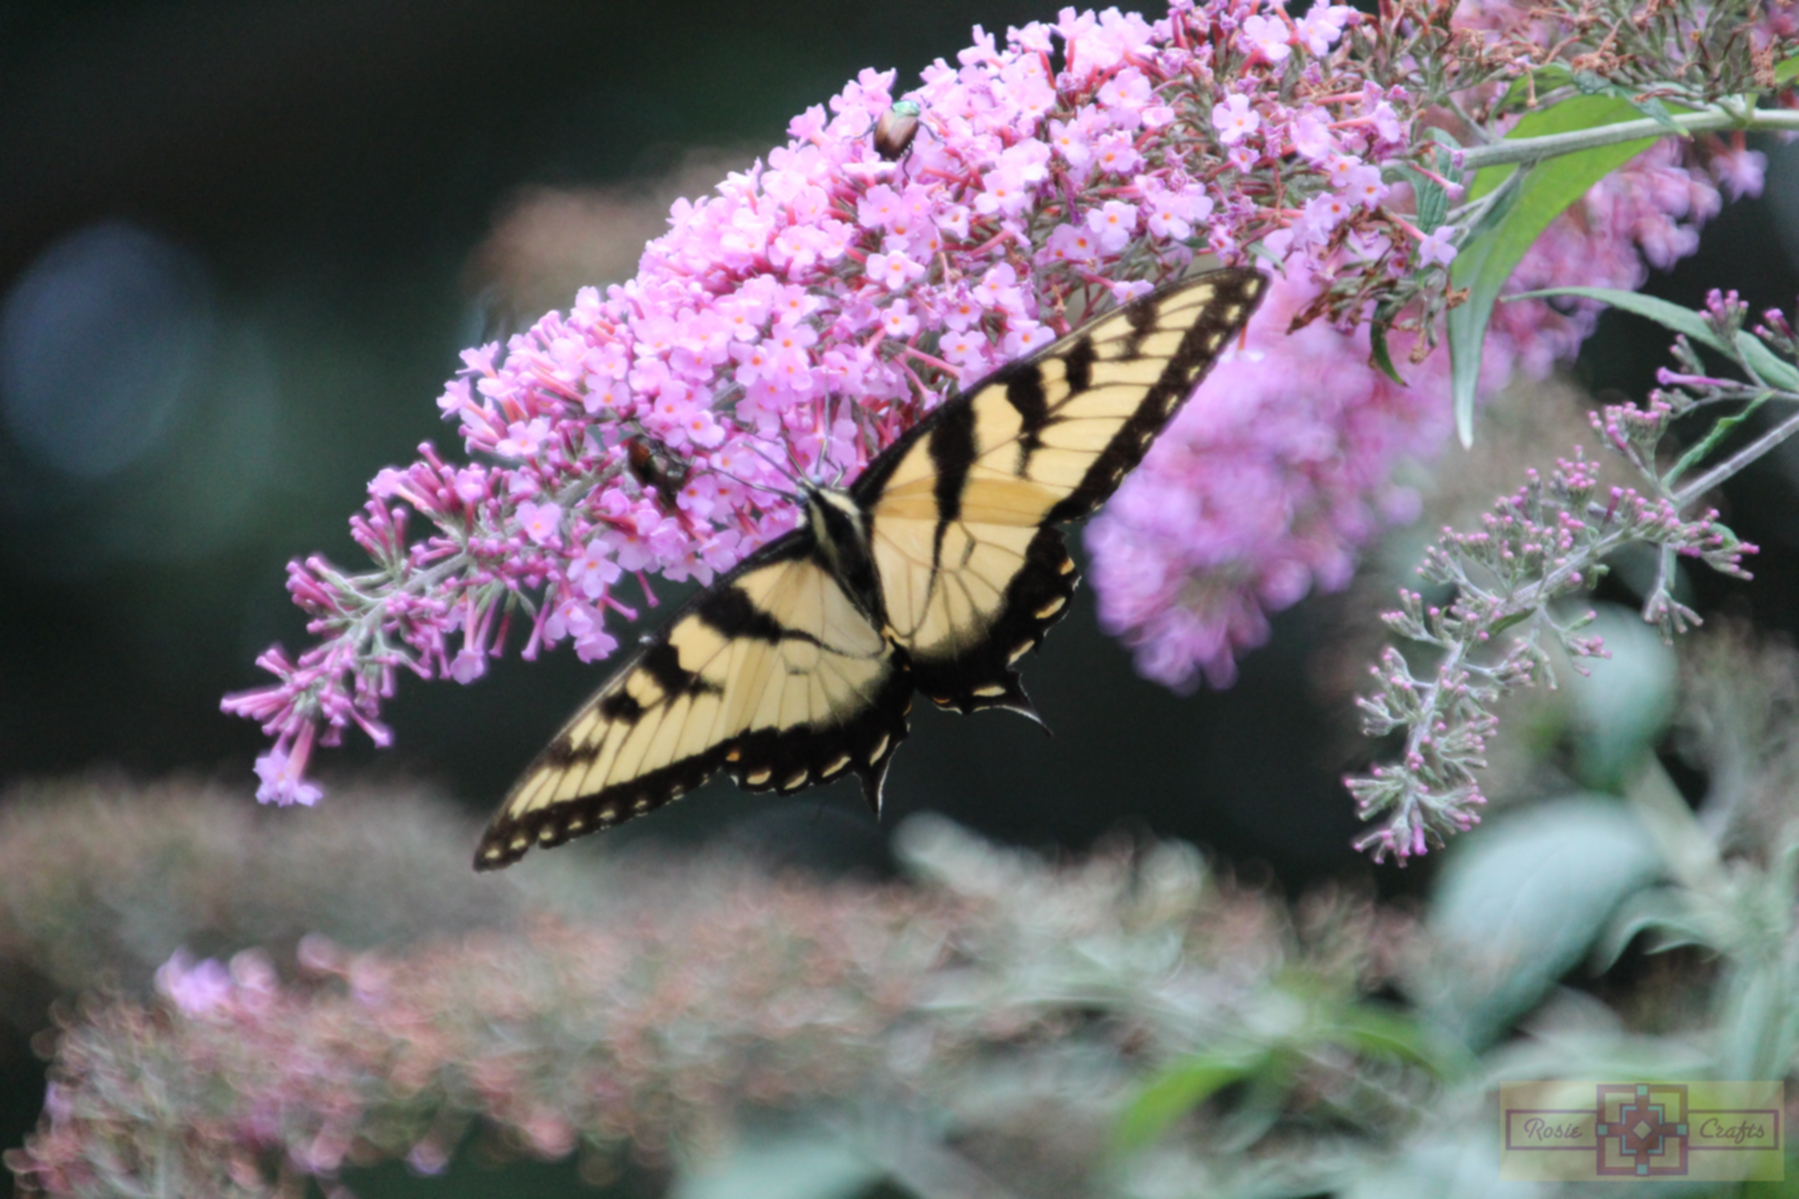 Rosie Crafts Eastern Tiger Swallowtail Photography